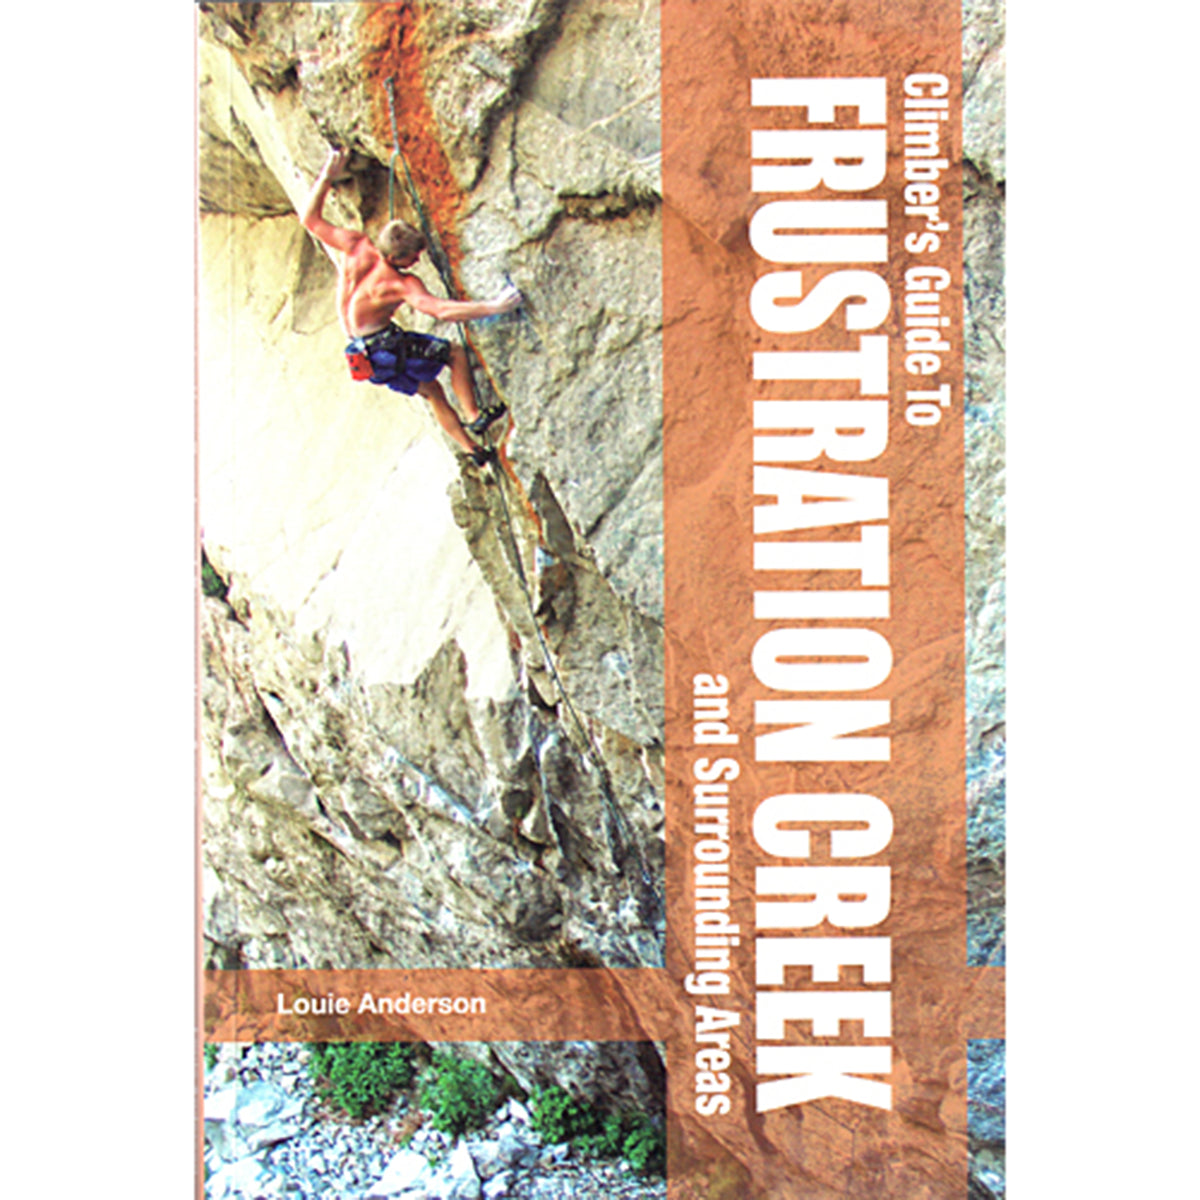 a man leads a route on steep rock on the cover of the climbers guide to frustration creek